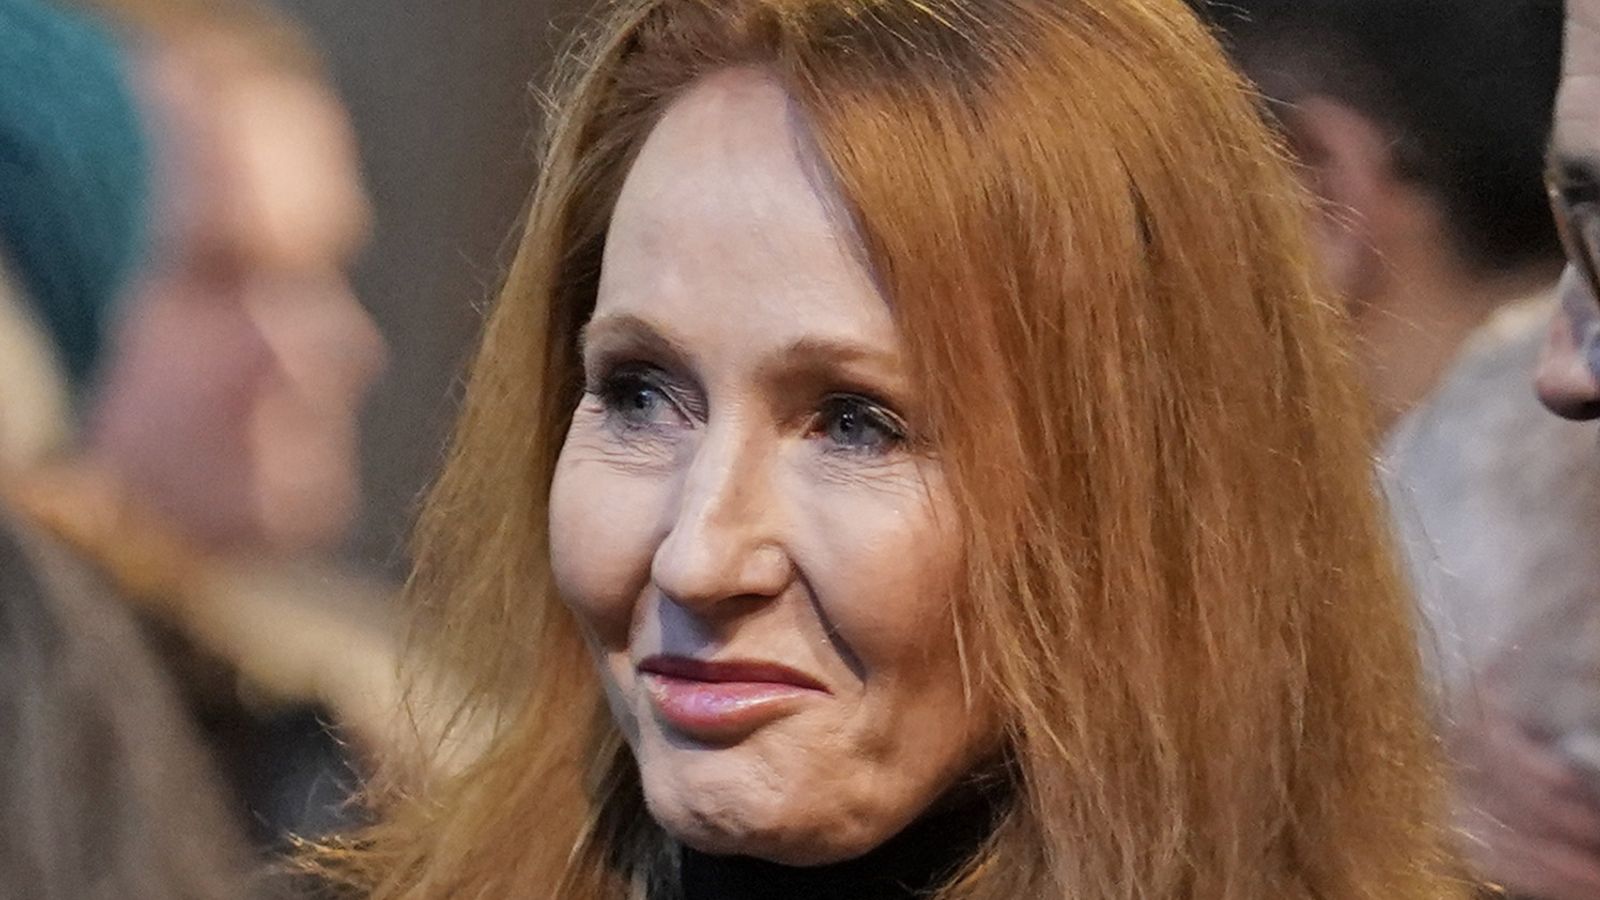 JK Rowling won't be prosecuted after police look into complaints about social media post